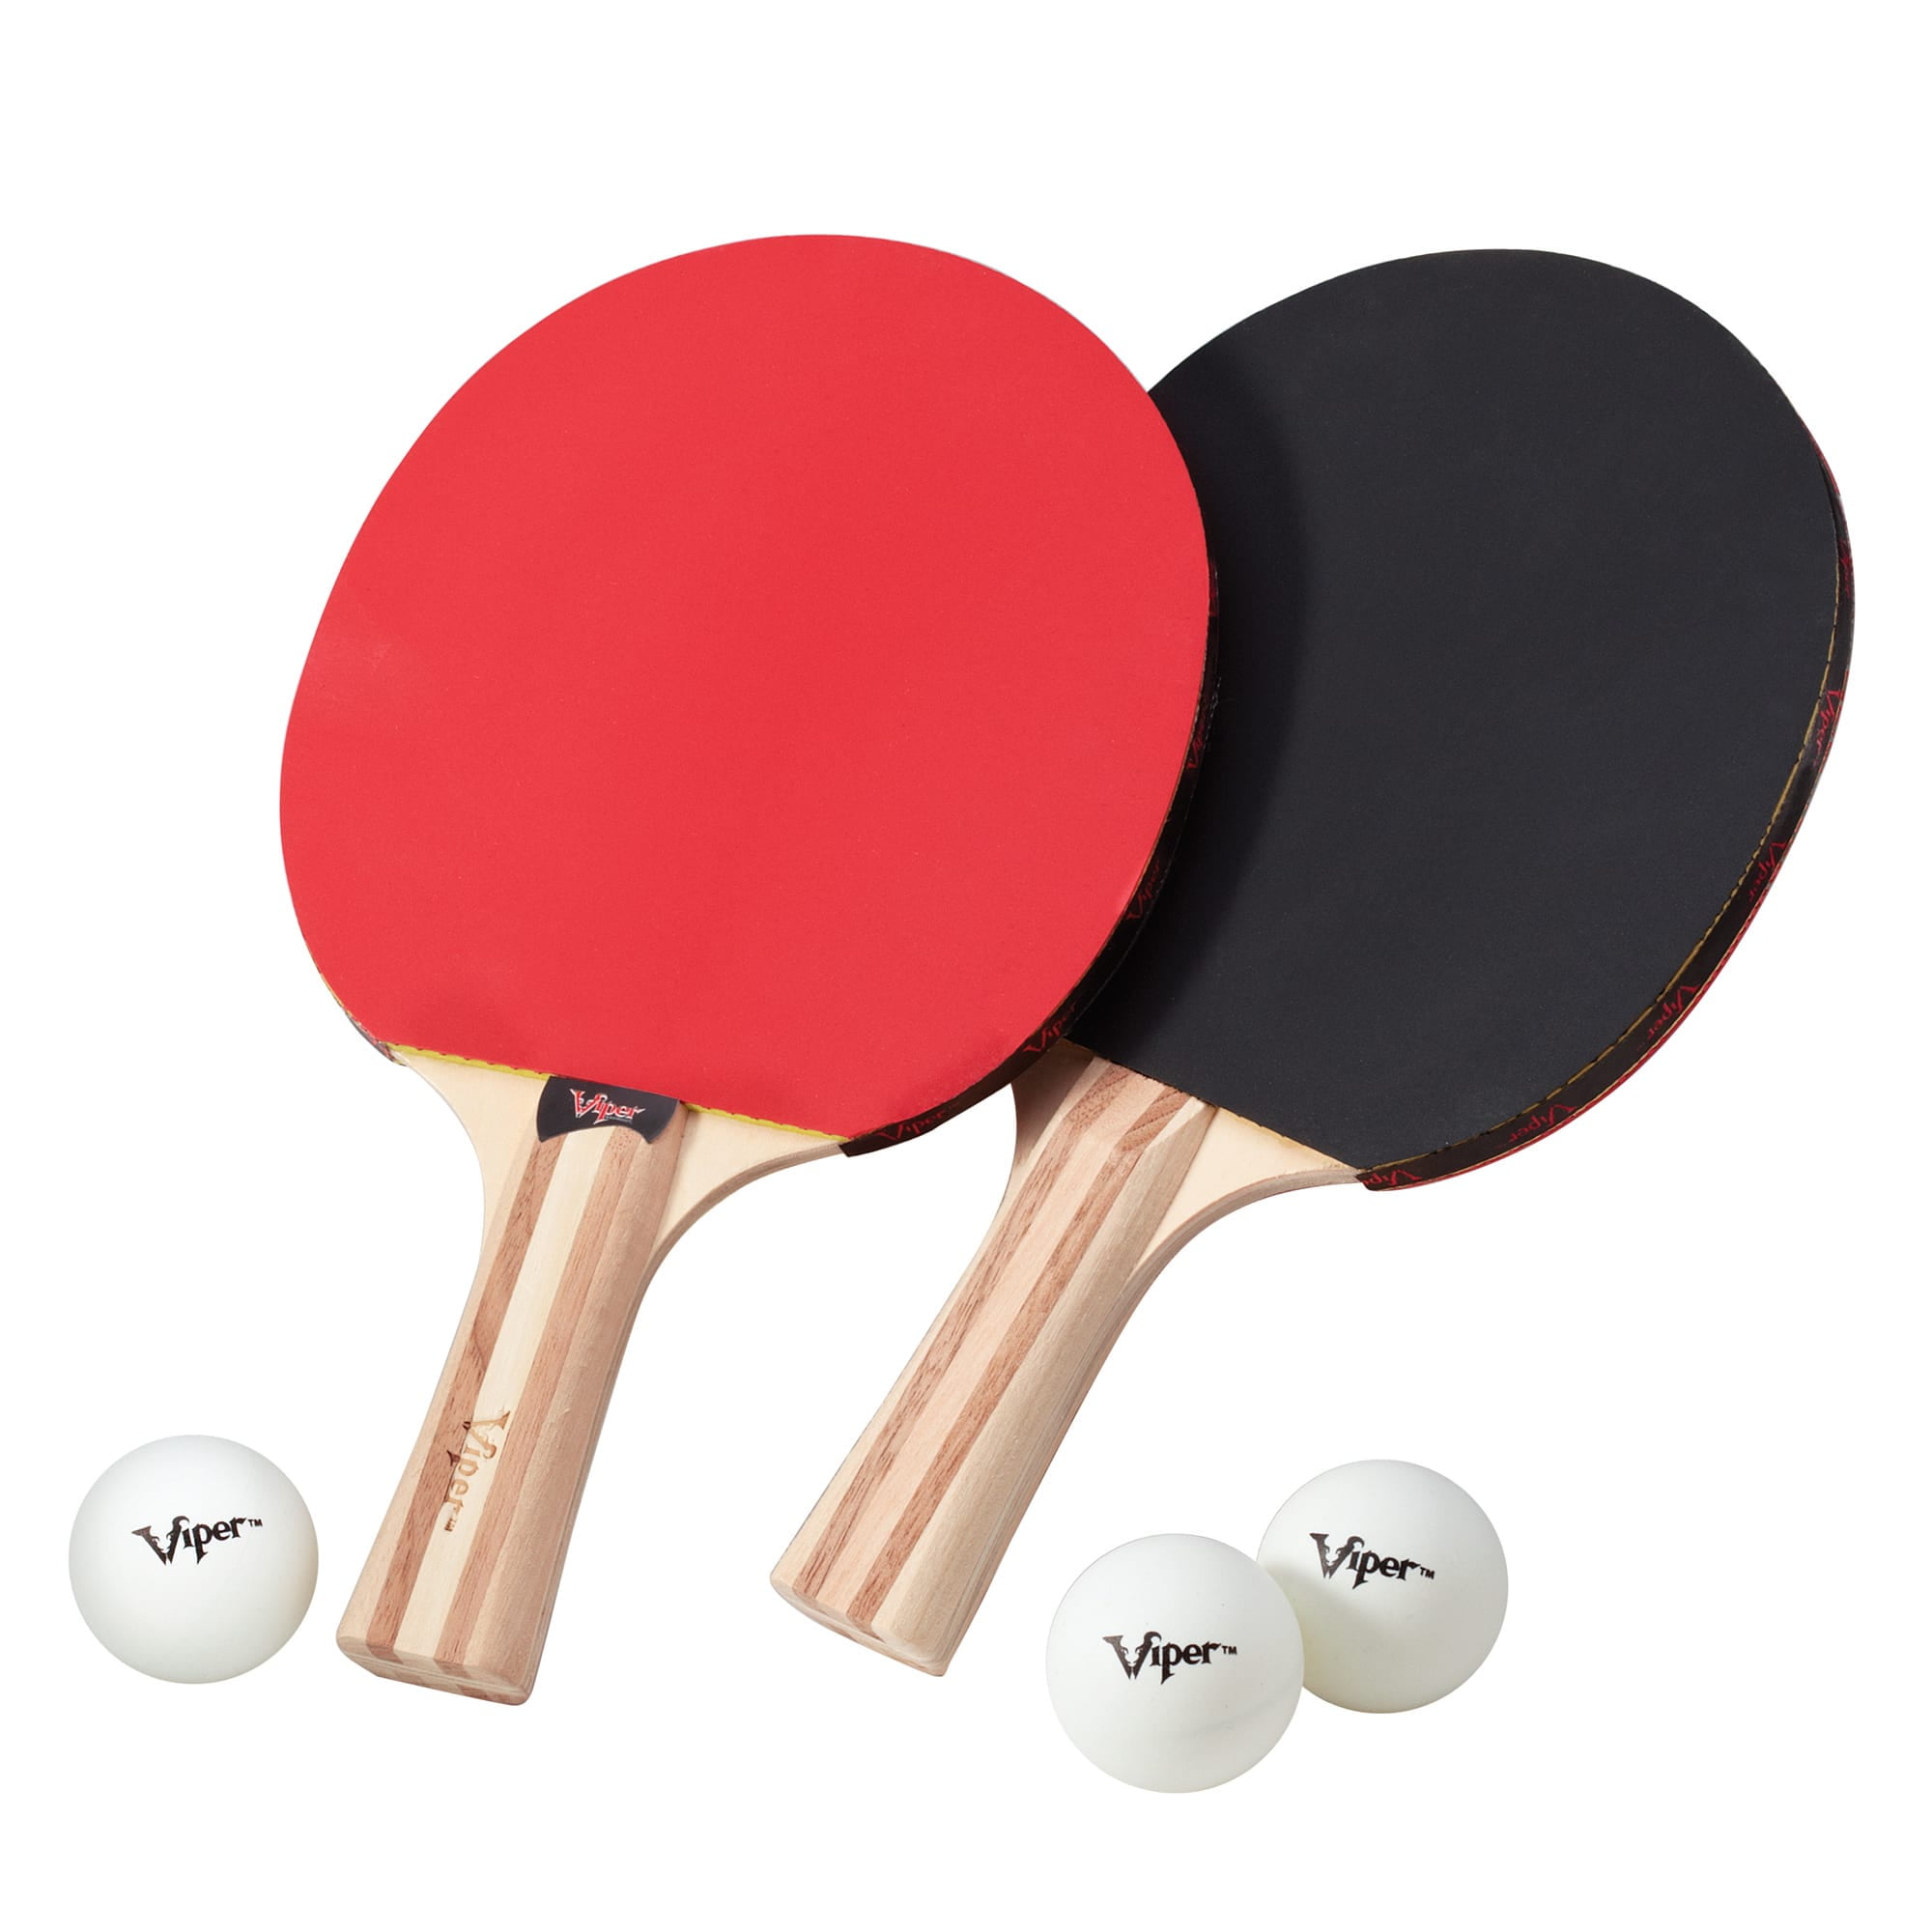 Details about   Table Tennis Bats Rackets 2 Player Set W/3 Ping Pong Balls For Kid Gift US A3B9 